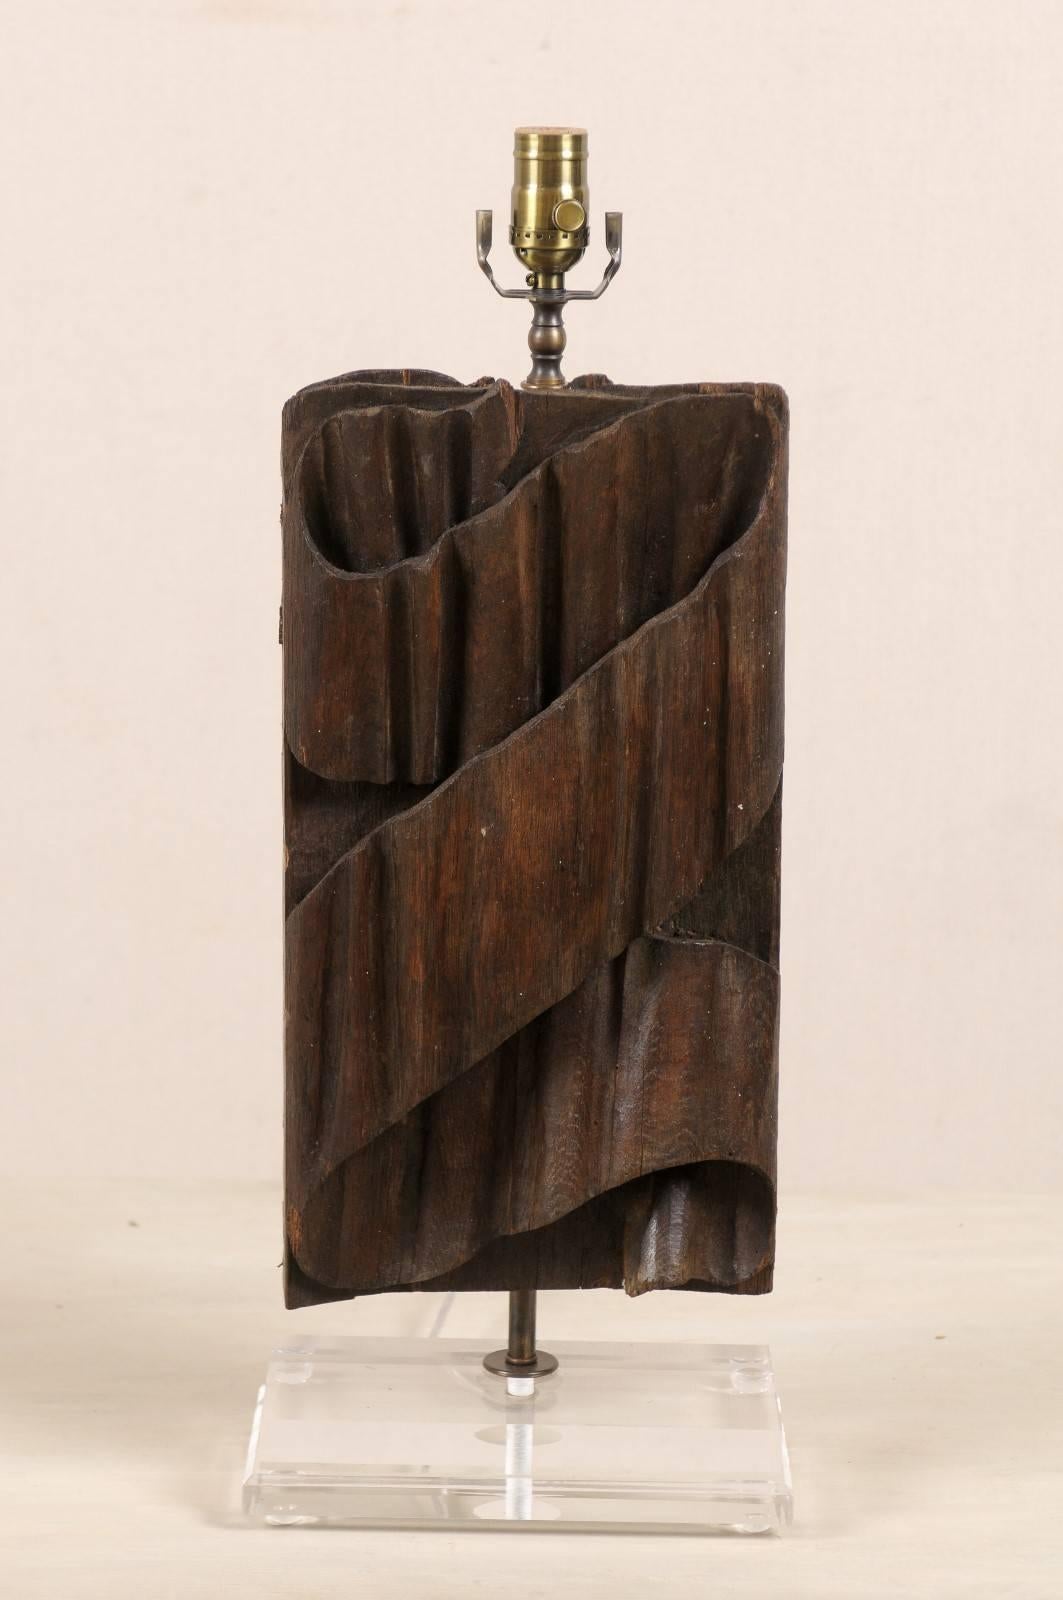 A single Italian fragment from the 19th century fashioned into a table lamp on new custom Lucite base. This Italian fragment has a pleated ribbon like motif carved along its body. This table lamp is a deep brown color with a rich red hue emerging